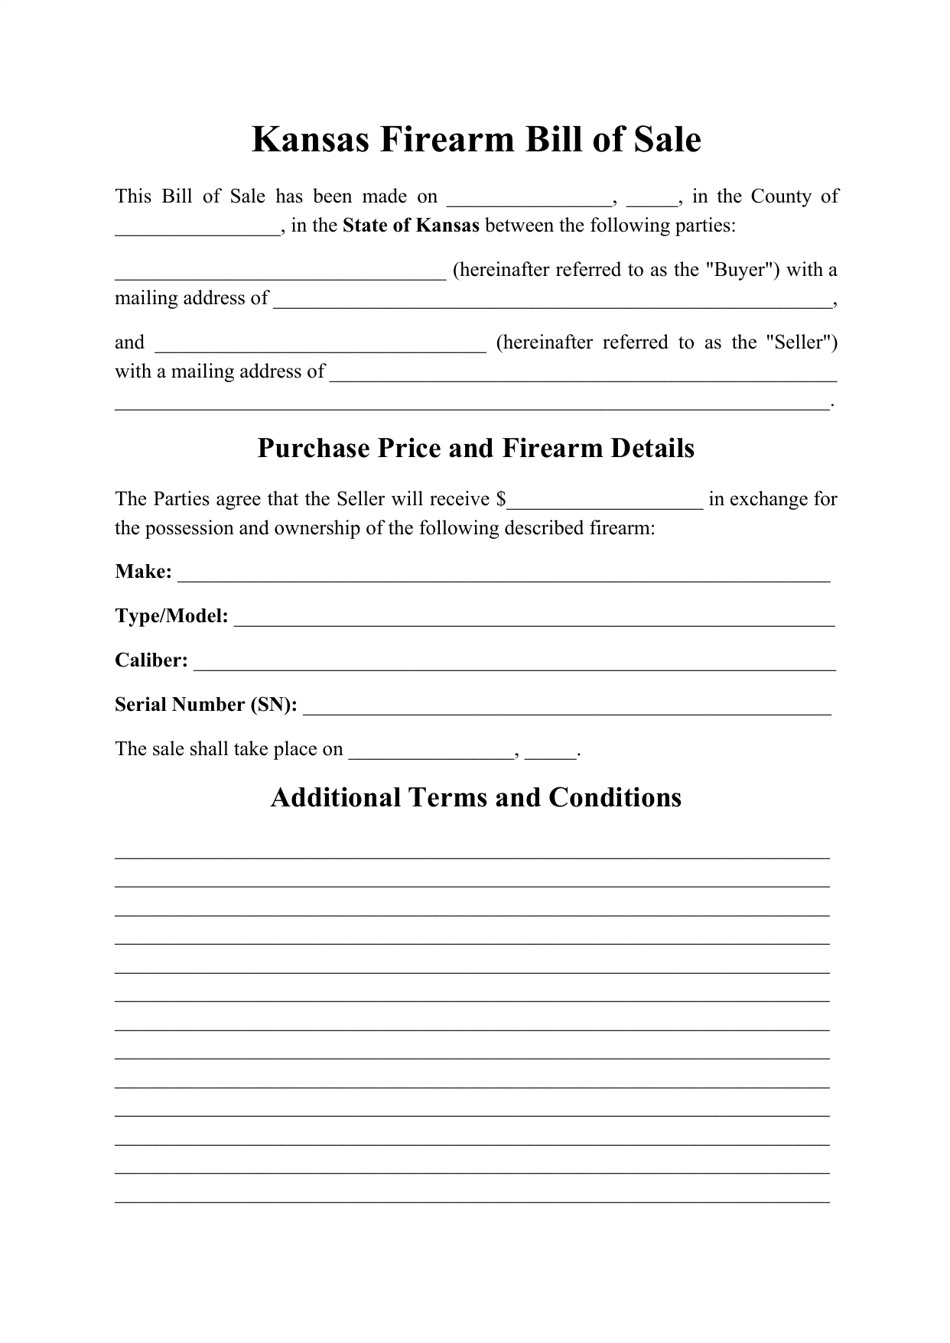 Kansas Firearm Bill of Sale Form Fill Out Sign Online and Download